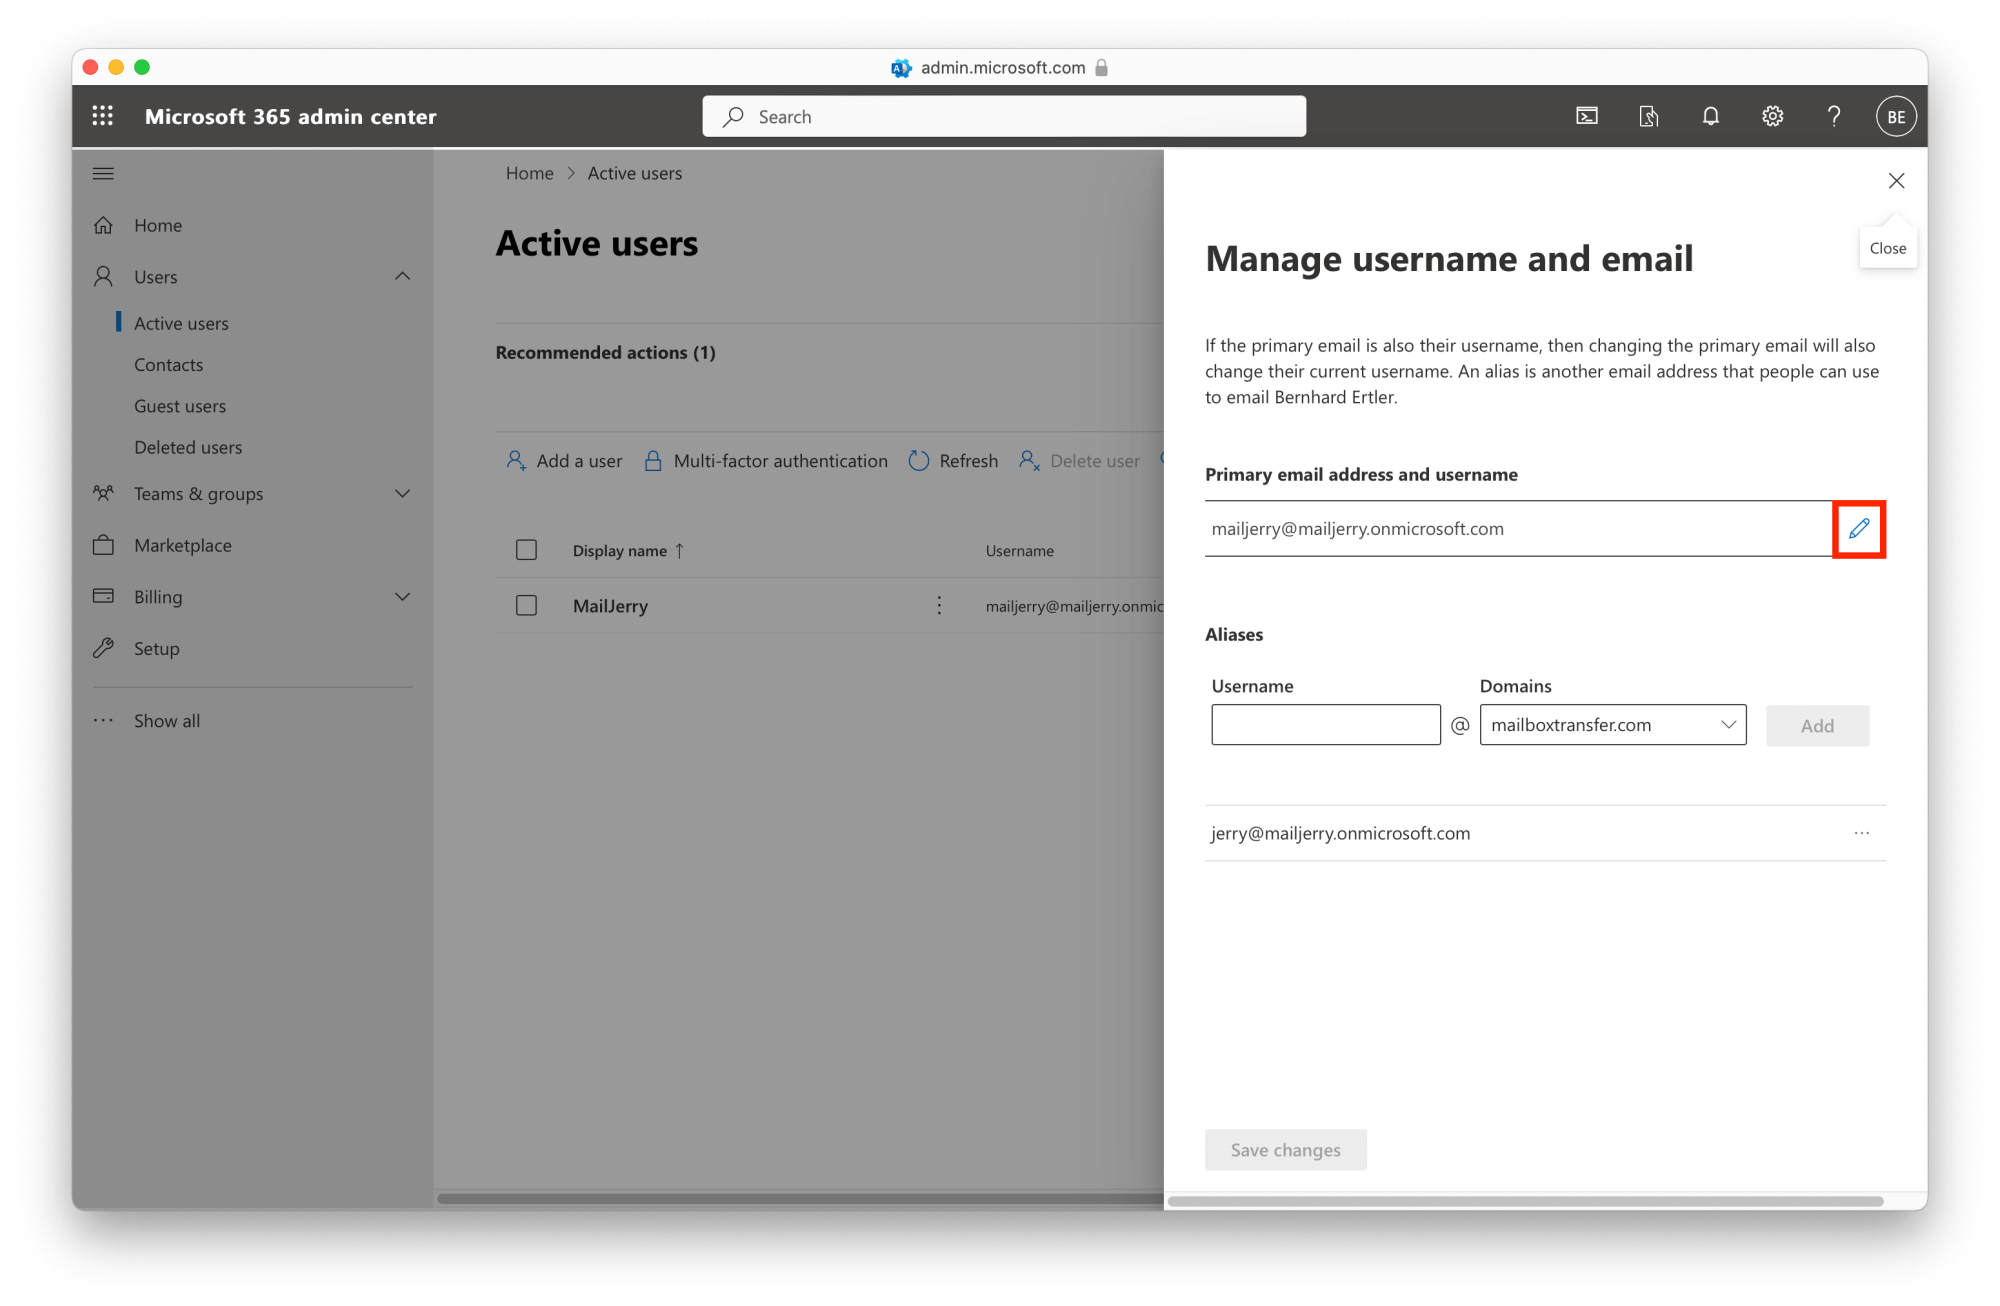 Migrate from GoDaddy to Office 365: Manage Username